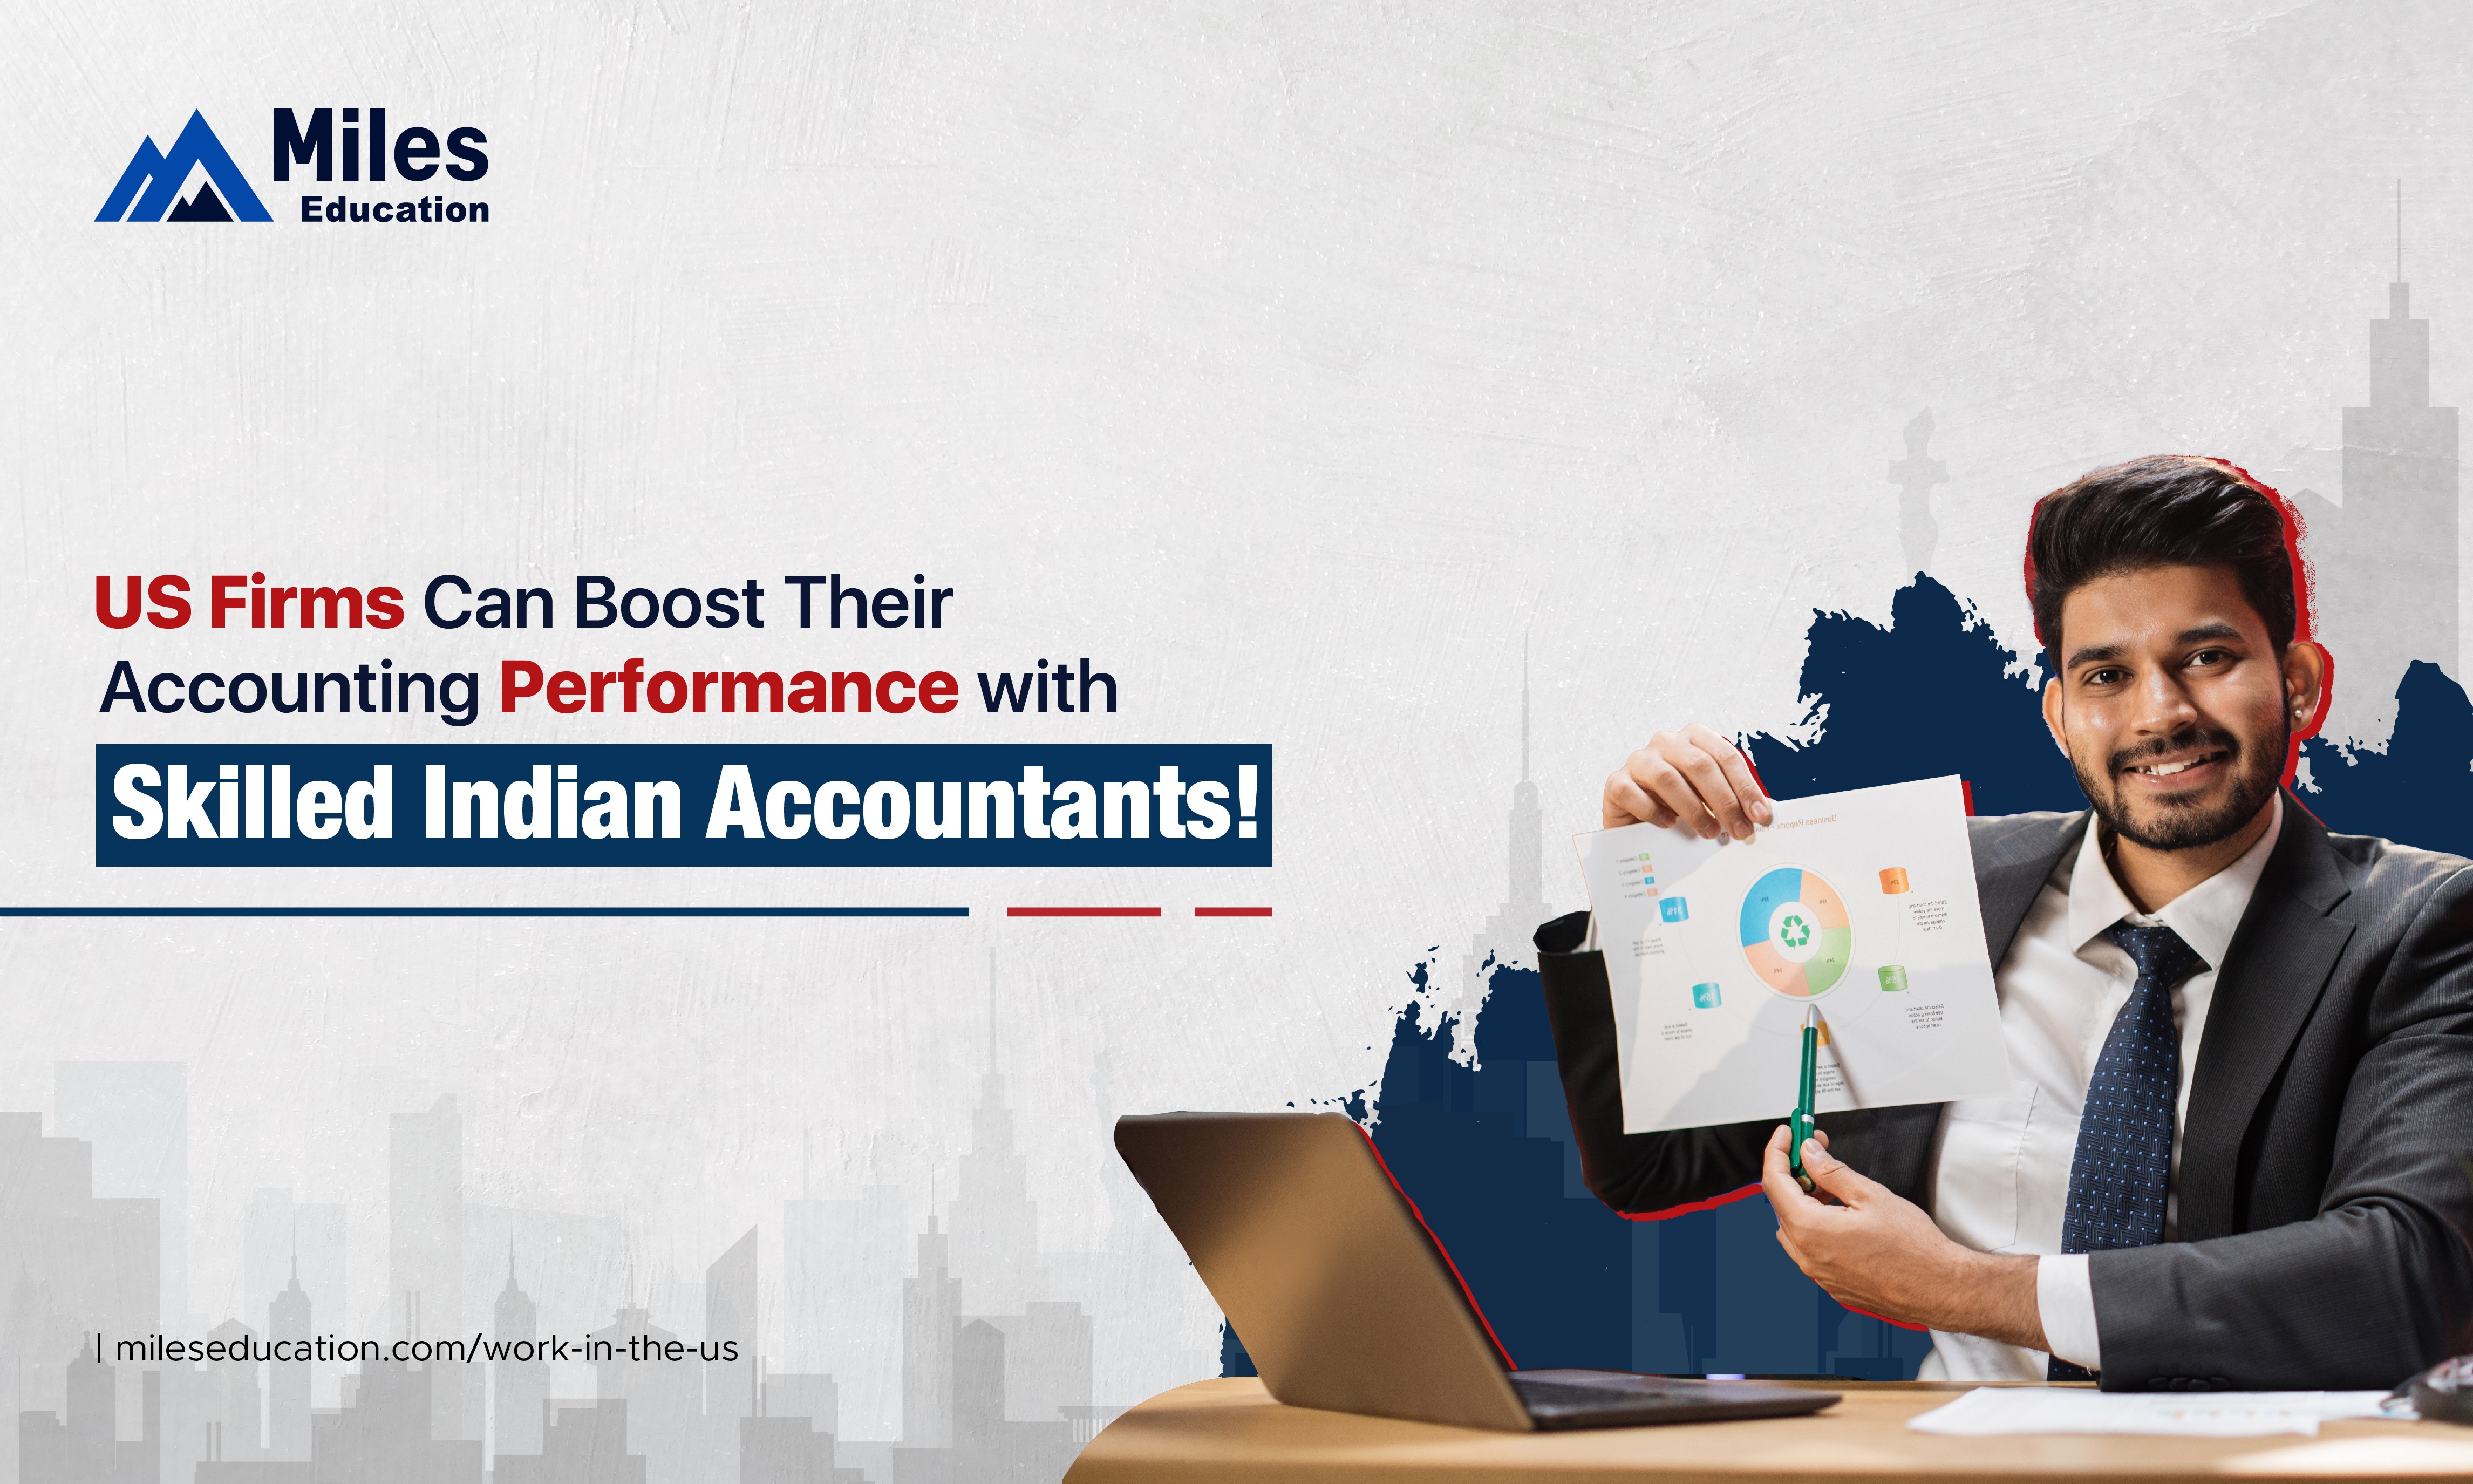 US Firms Can Boost Their Accounting Performance with Skilled Indian Accountants!